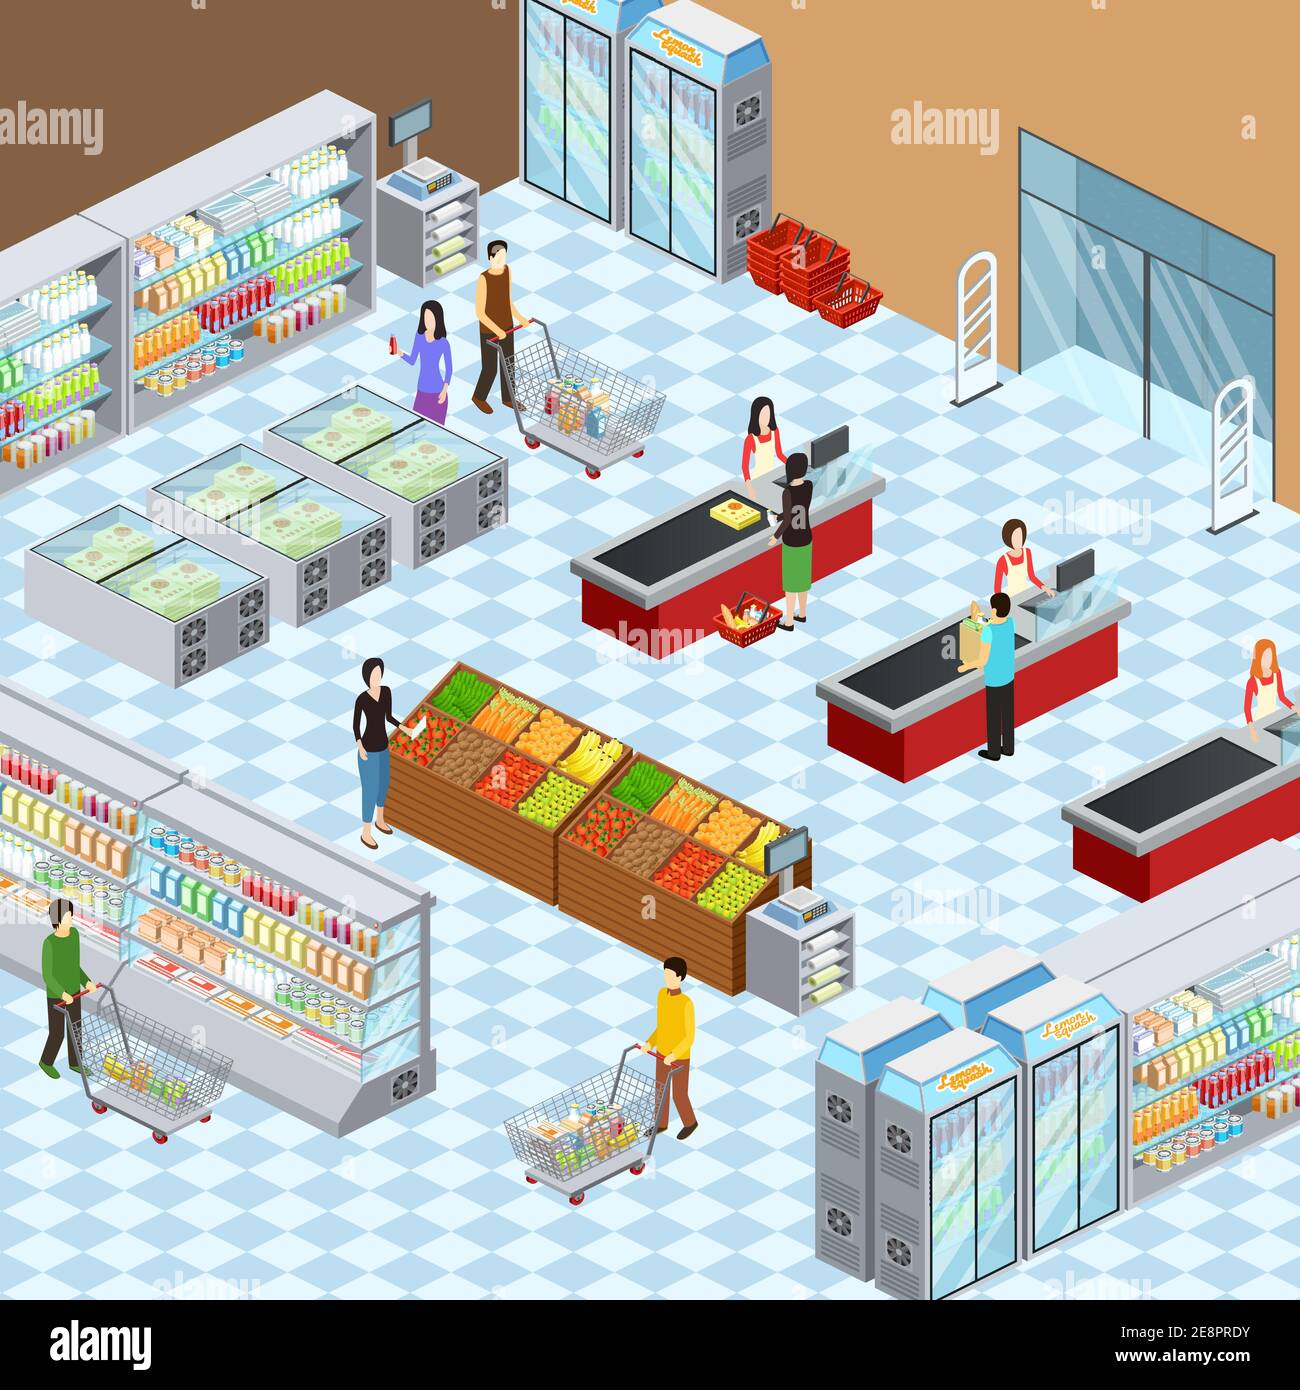 Supermarket grocery store interior design isometric composition with customers at display racks and paying abstract vector illustration Stock Vector